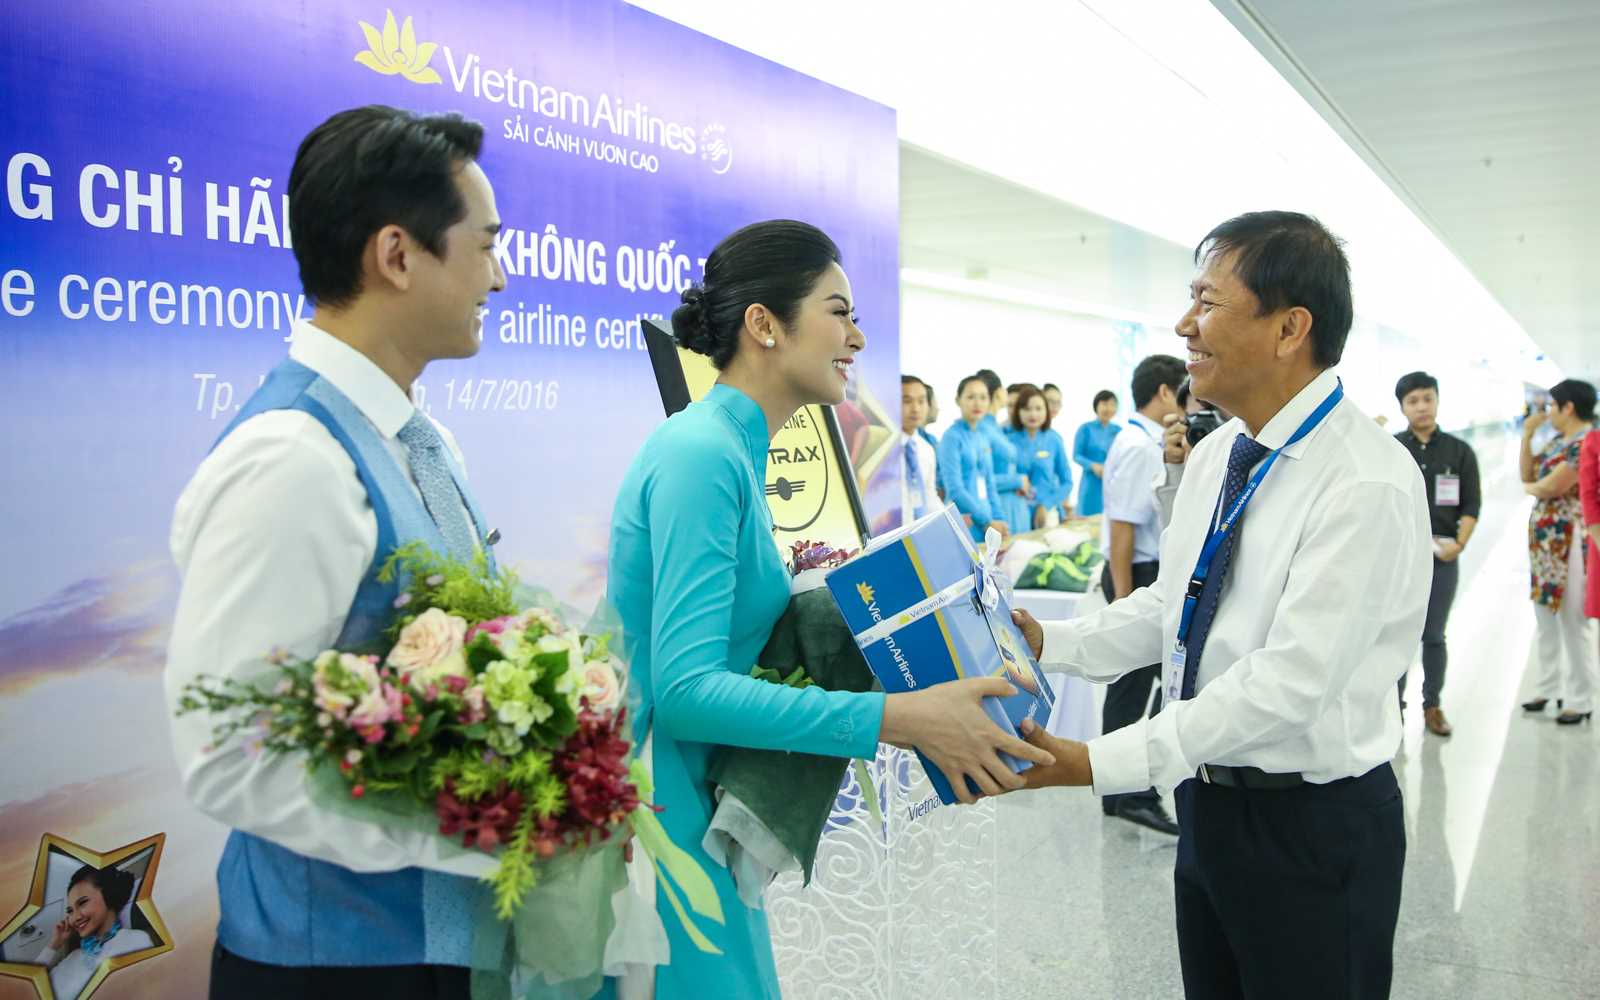 Vietnam Airlines was among the top 3 most progressive airlines in the world in 2016. (Source: Vietnam Airlines)